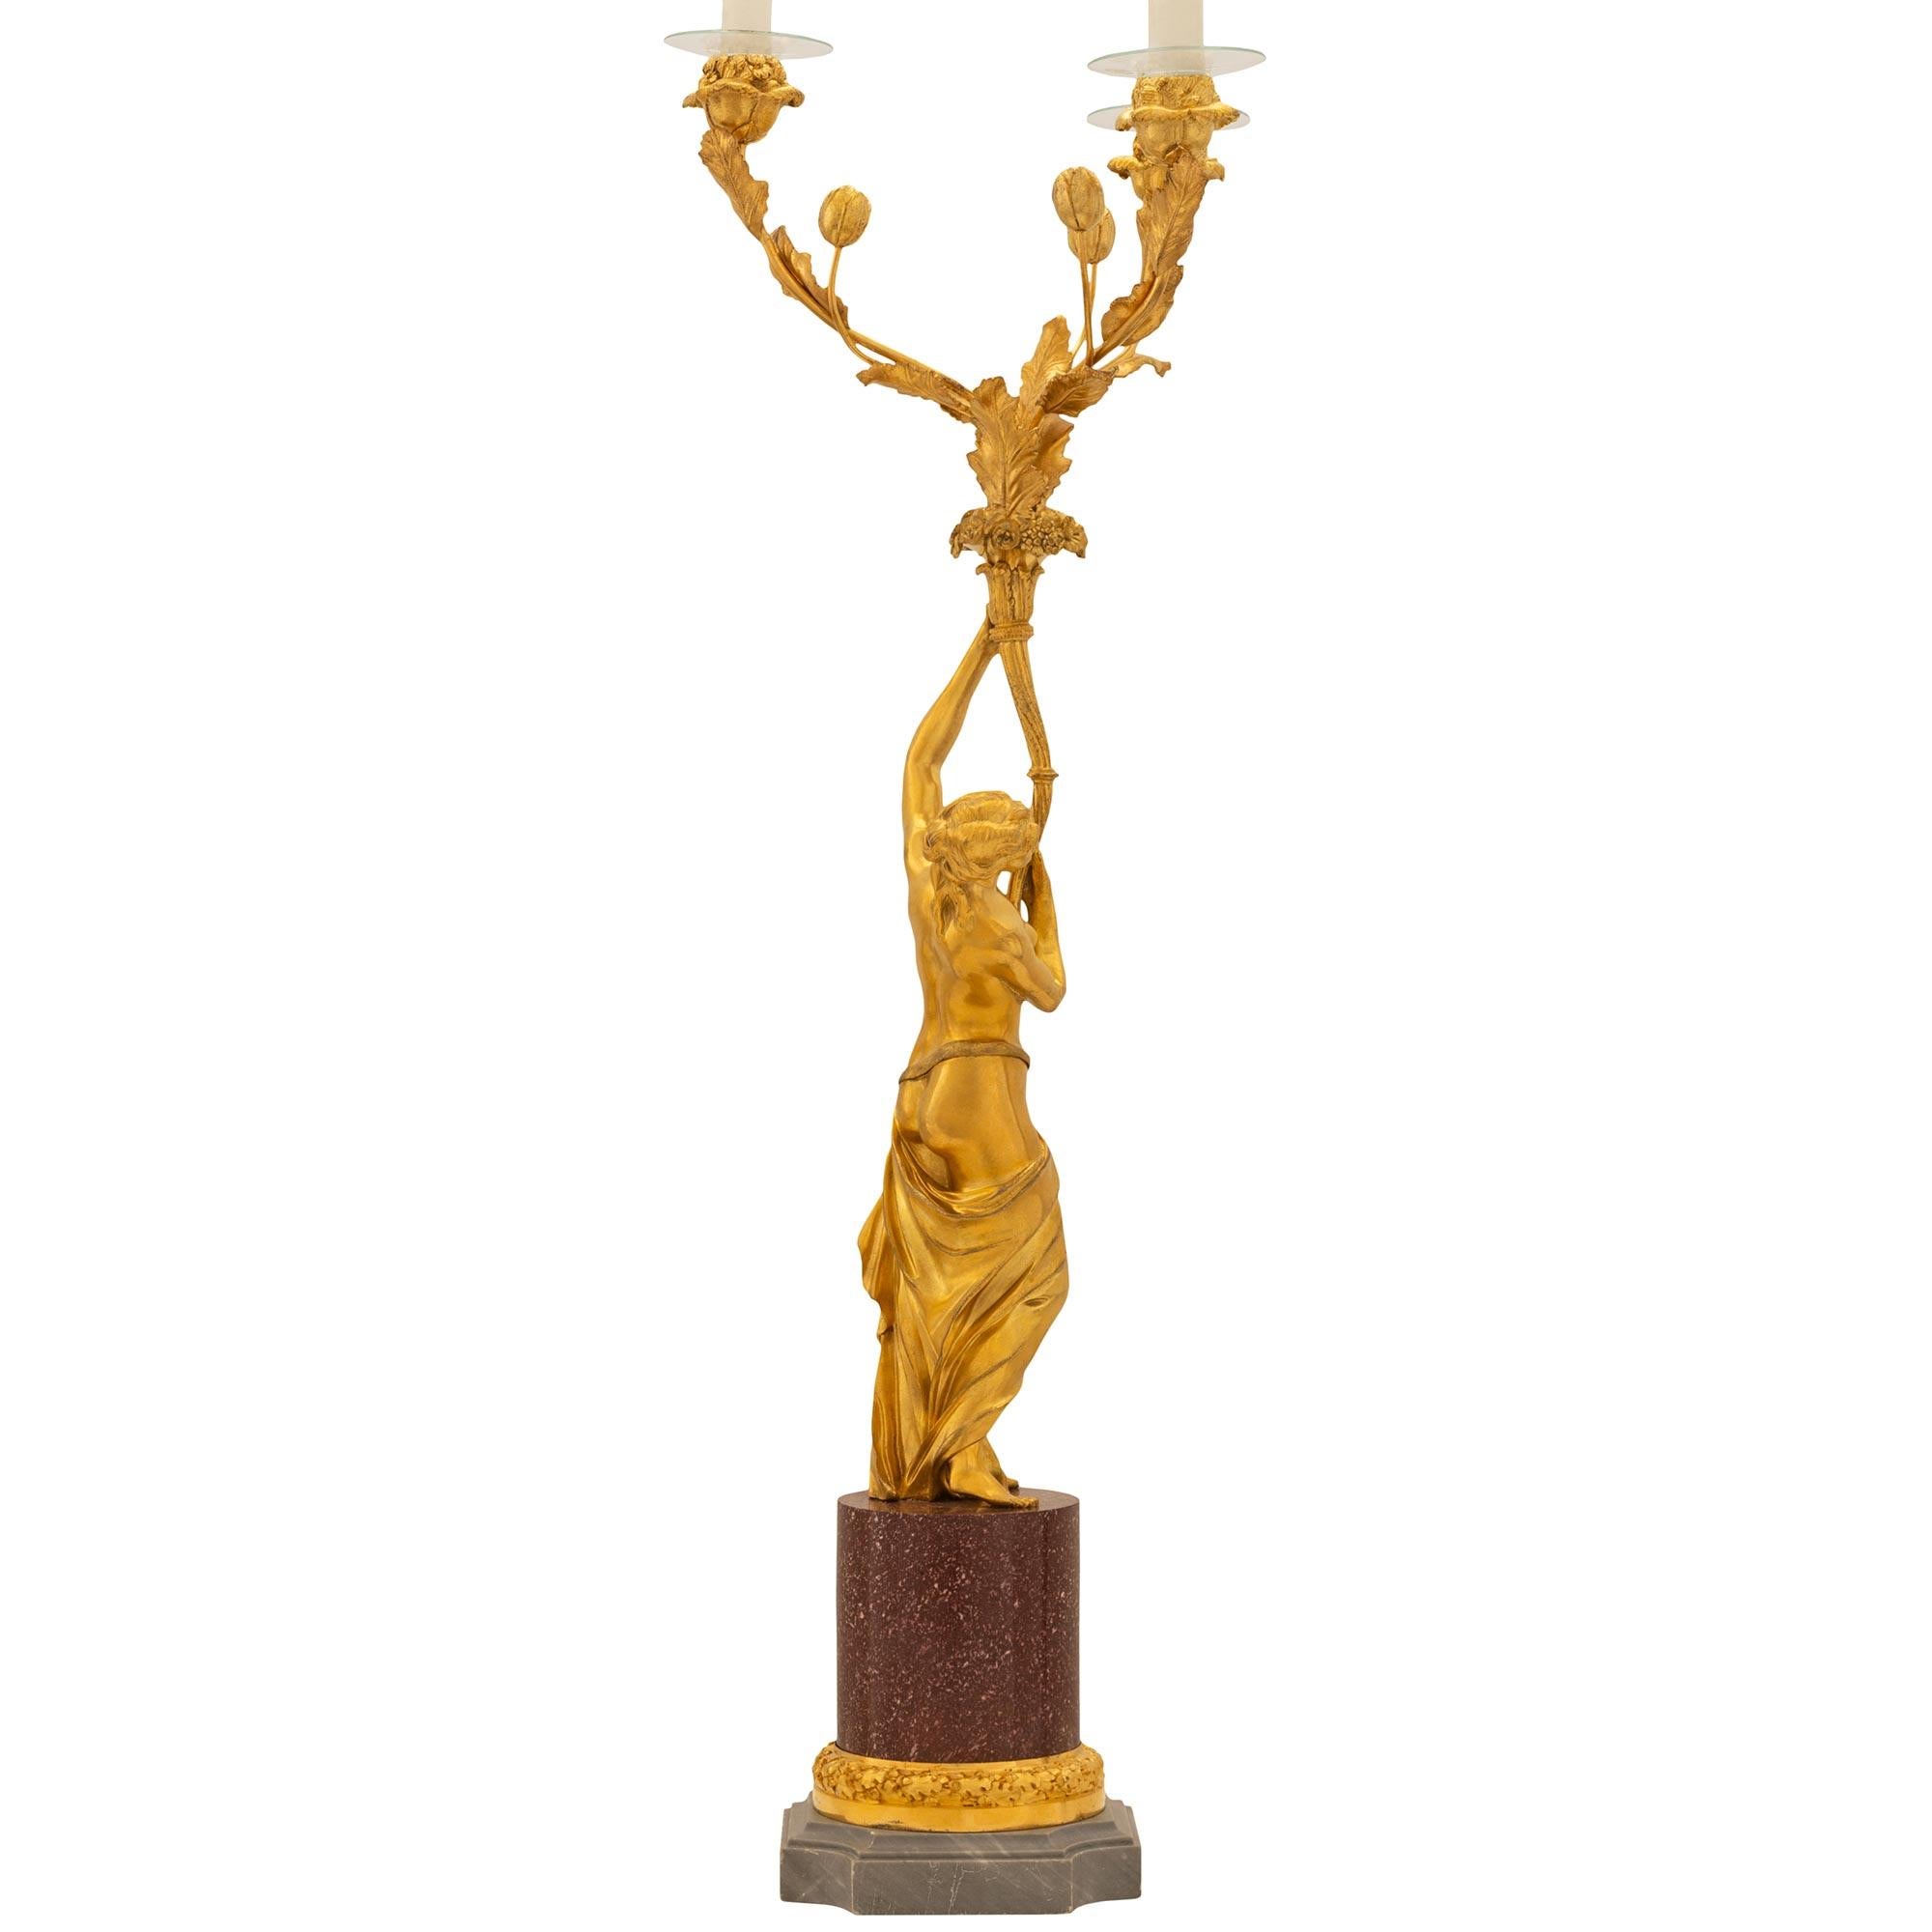 French Pair of 19th Century Louis XVI Style Ormolu, Marble and Porphyry Candelabras For Sale